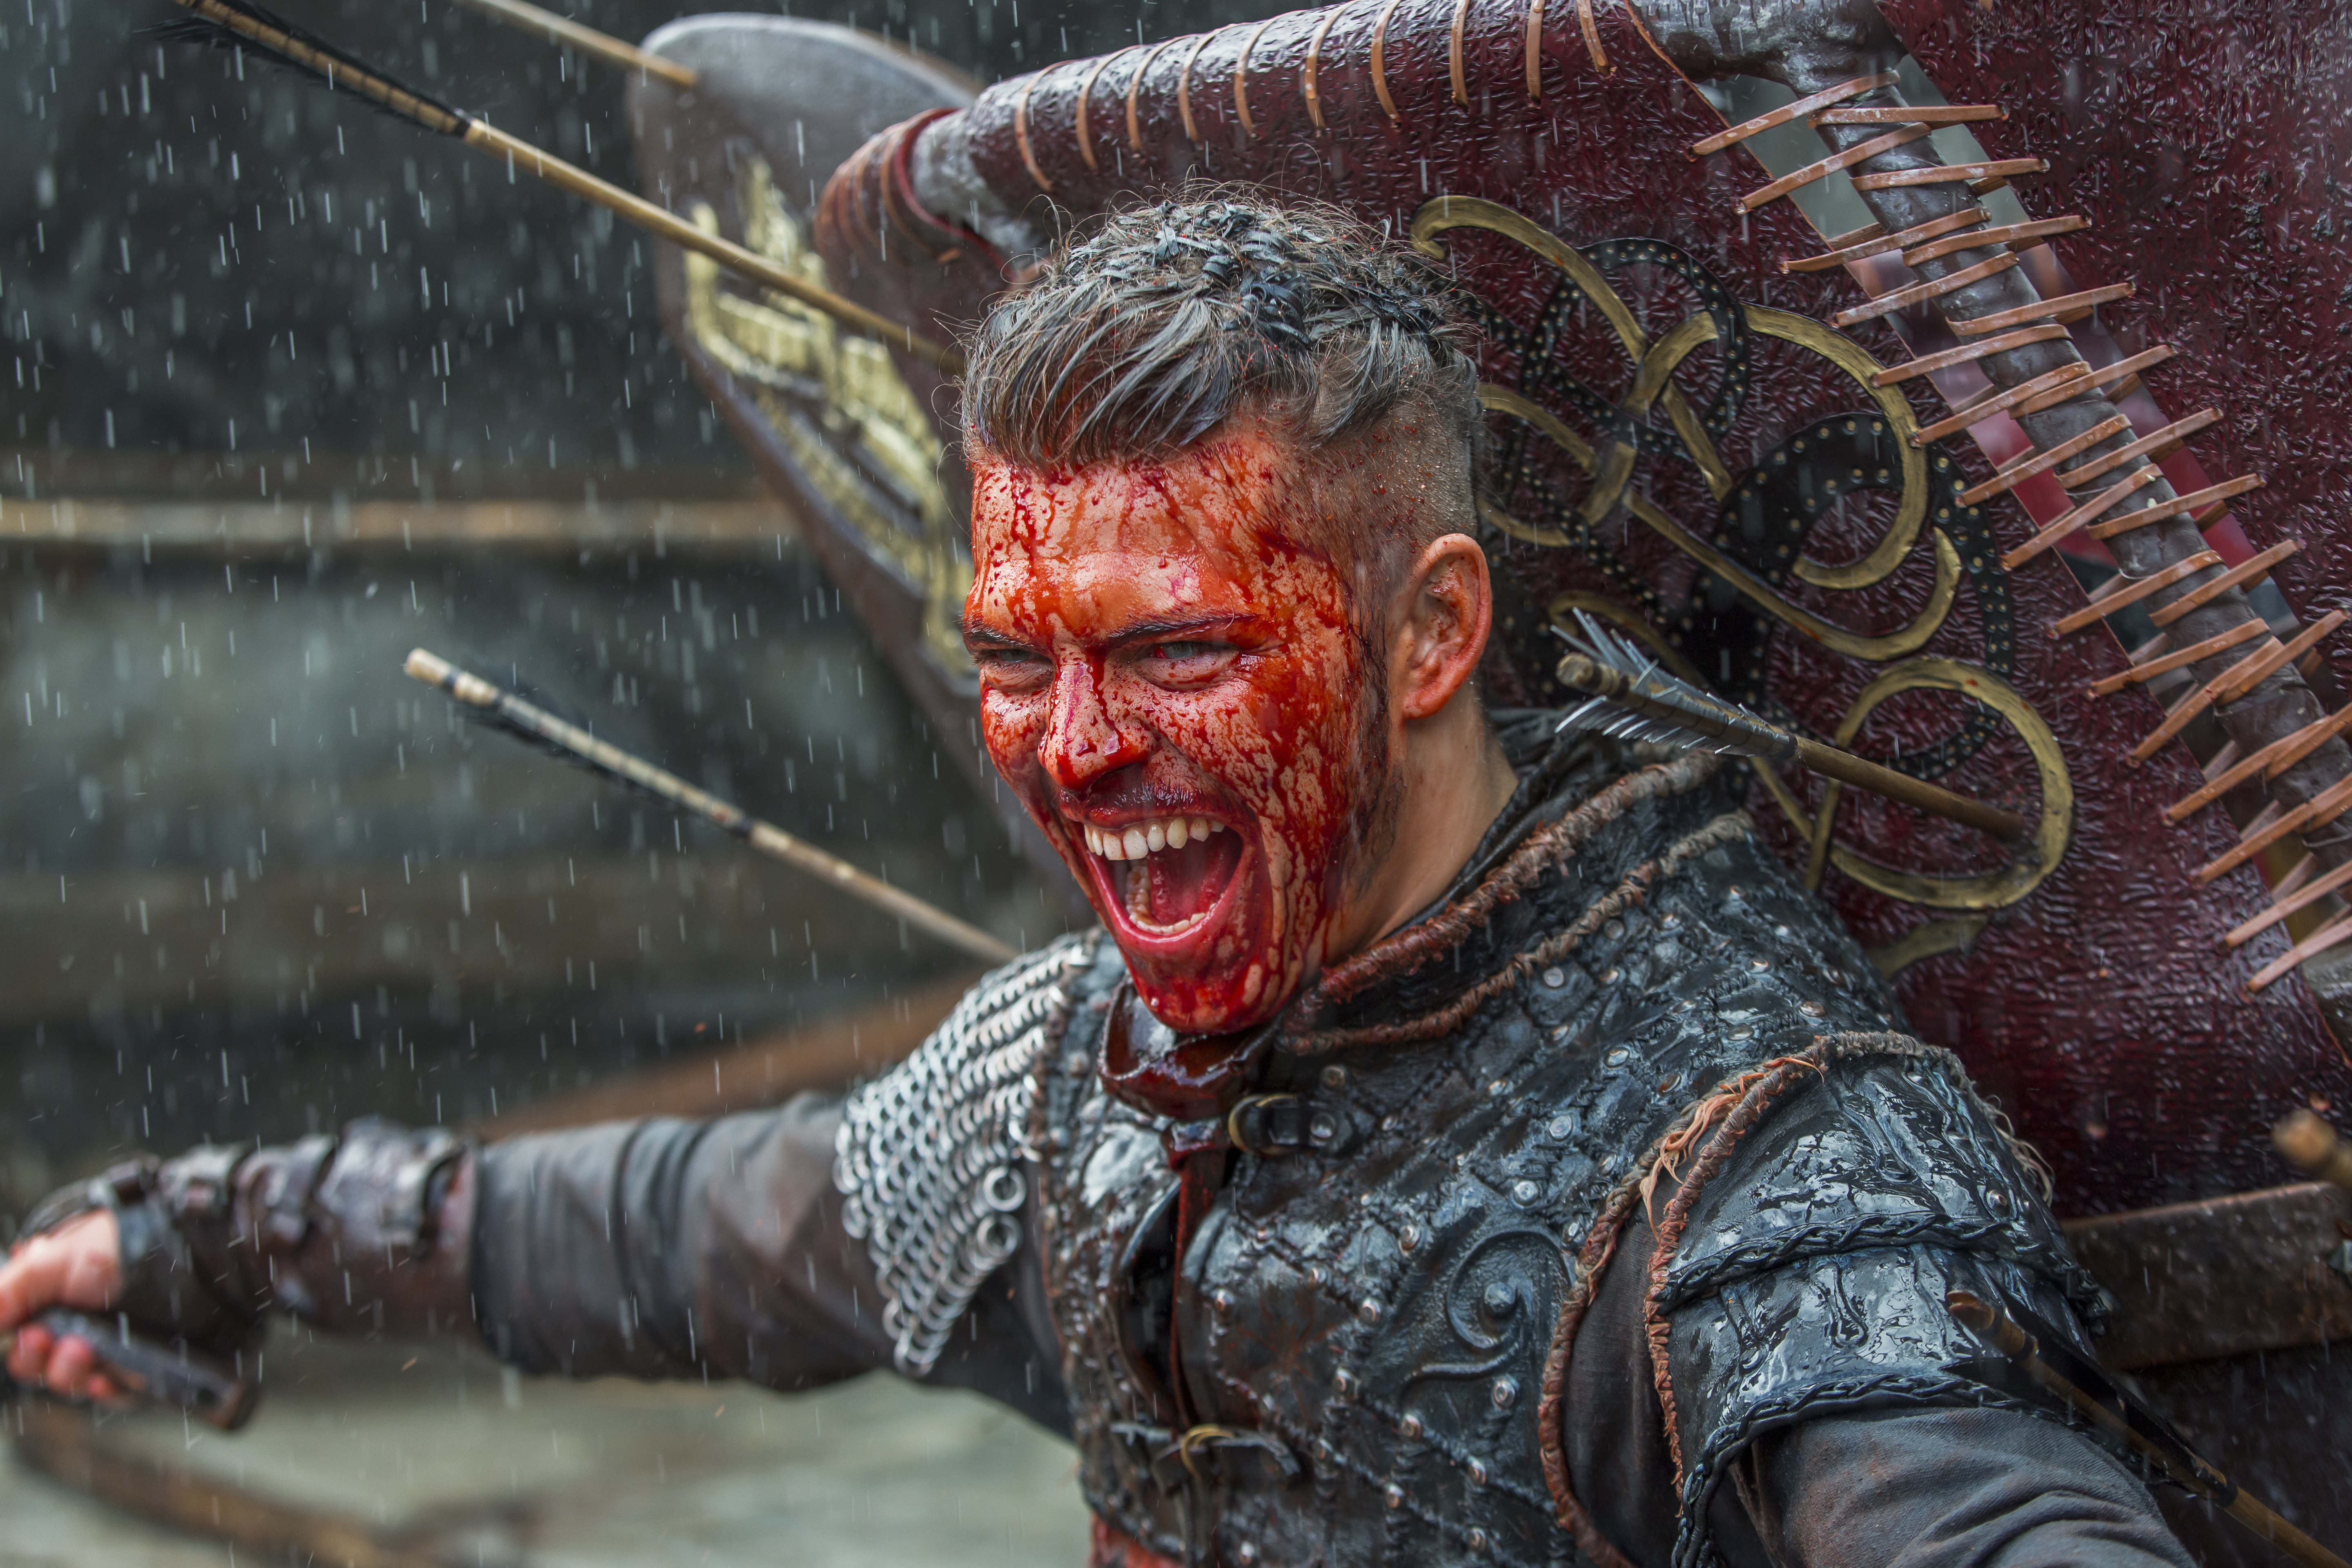 My life was filled with Anger - Ivar the boneless, Ivar